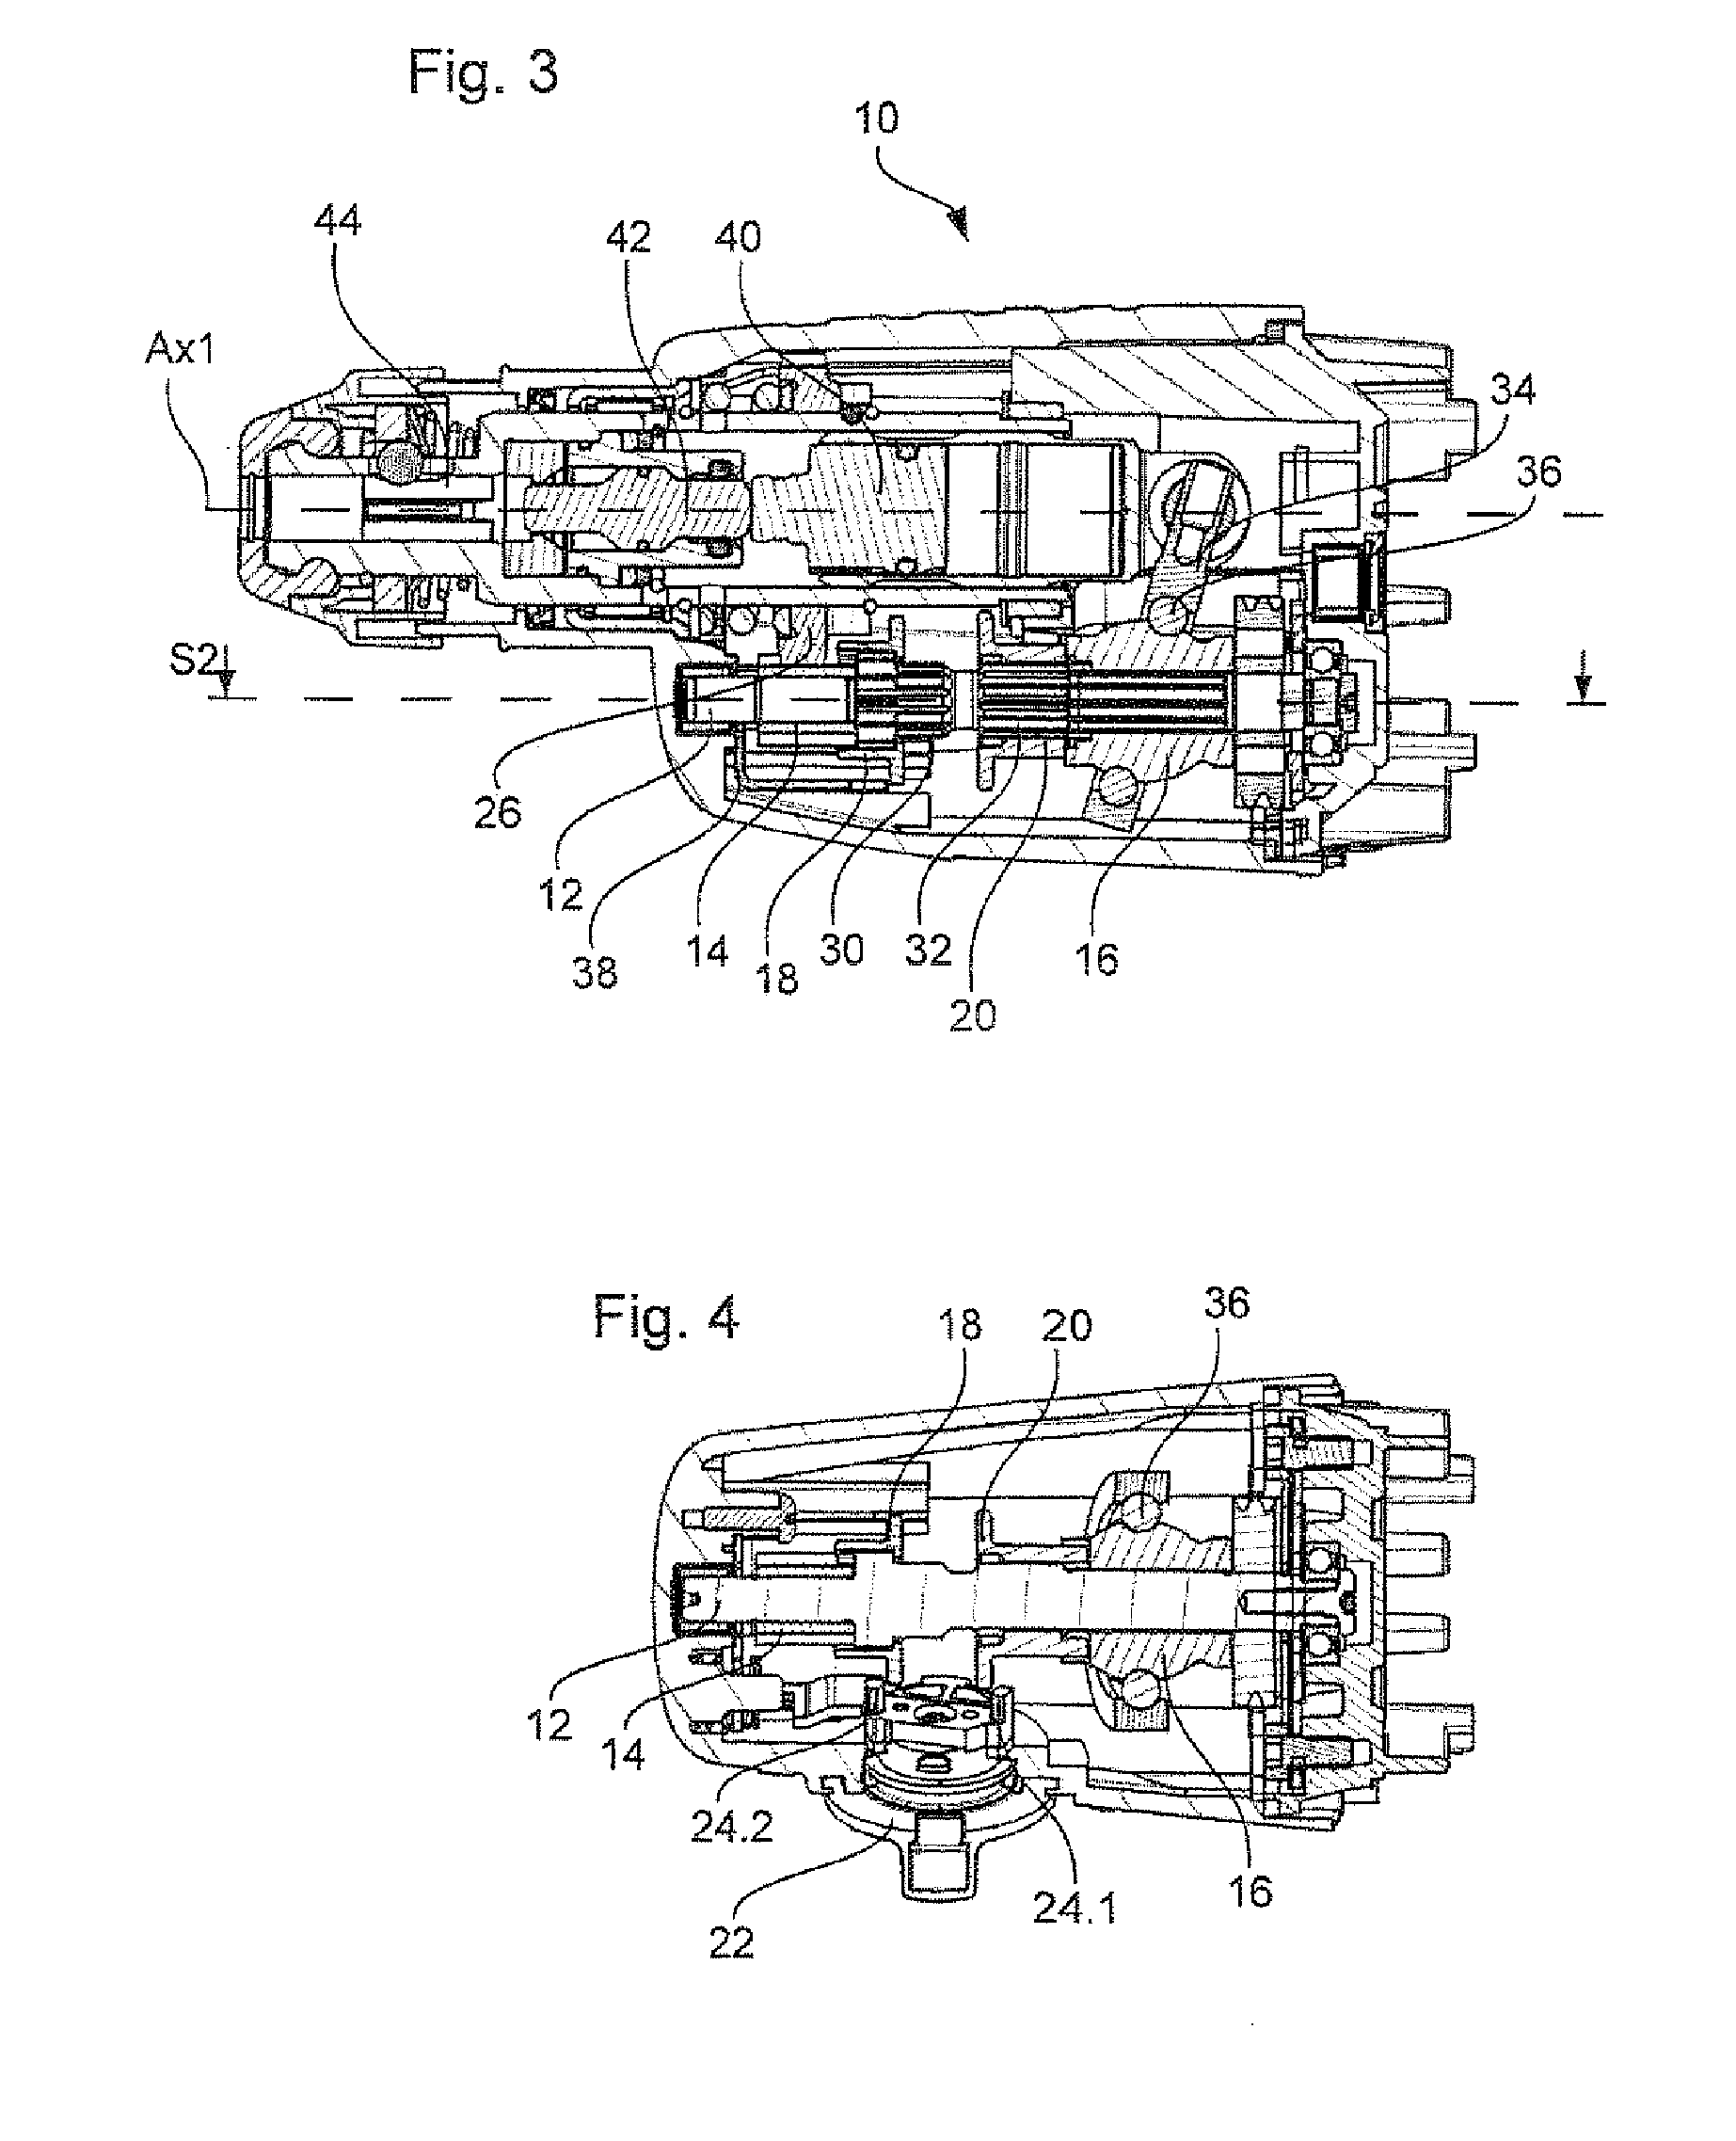 Electrical tool with gear switching